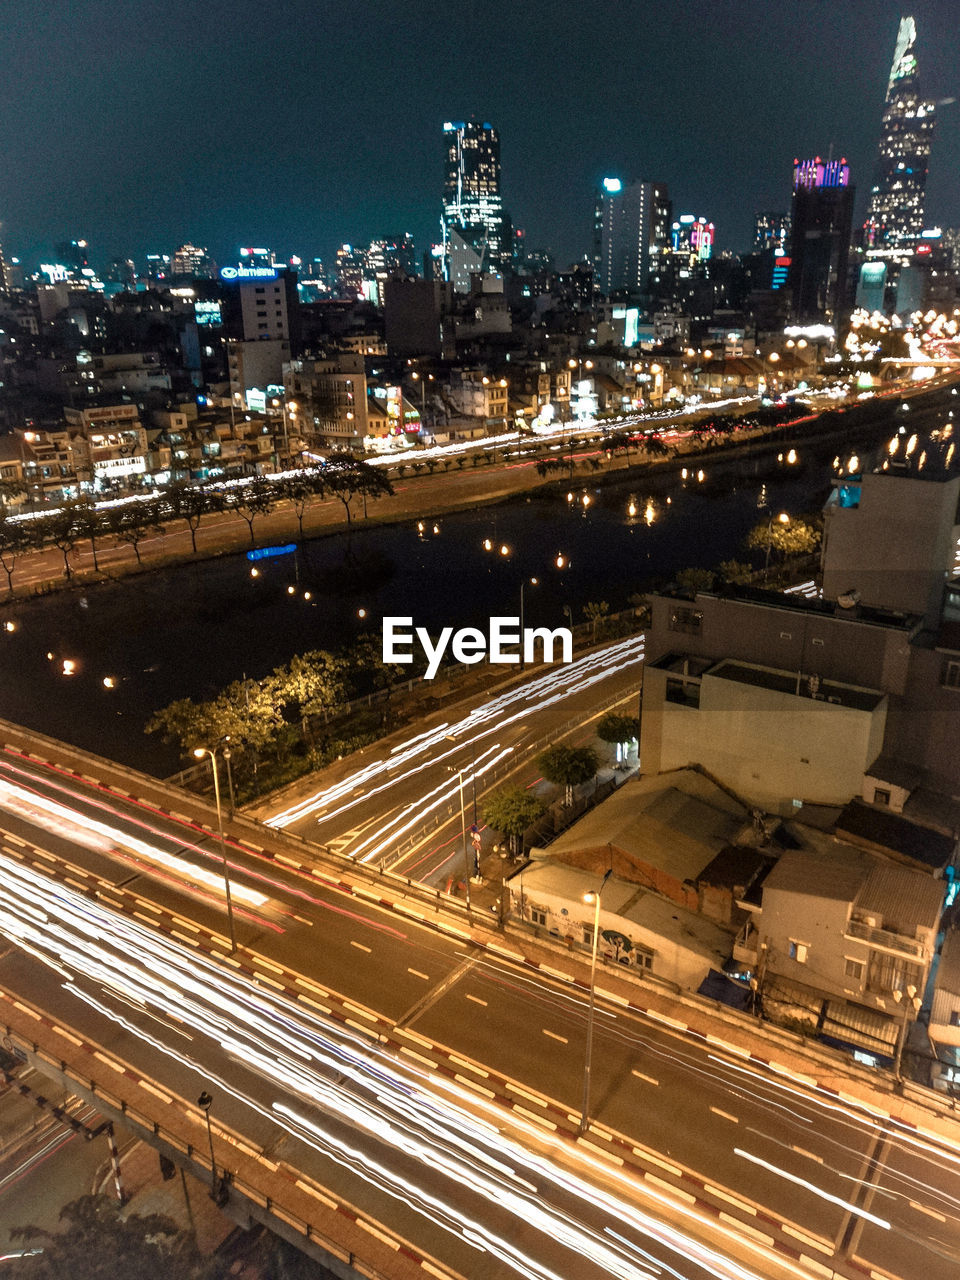 HIGH ANGLE VIEW OF LIGHT TRAILS ON ROAD AMIDST BUILDINGS IN CITY